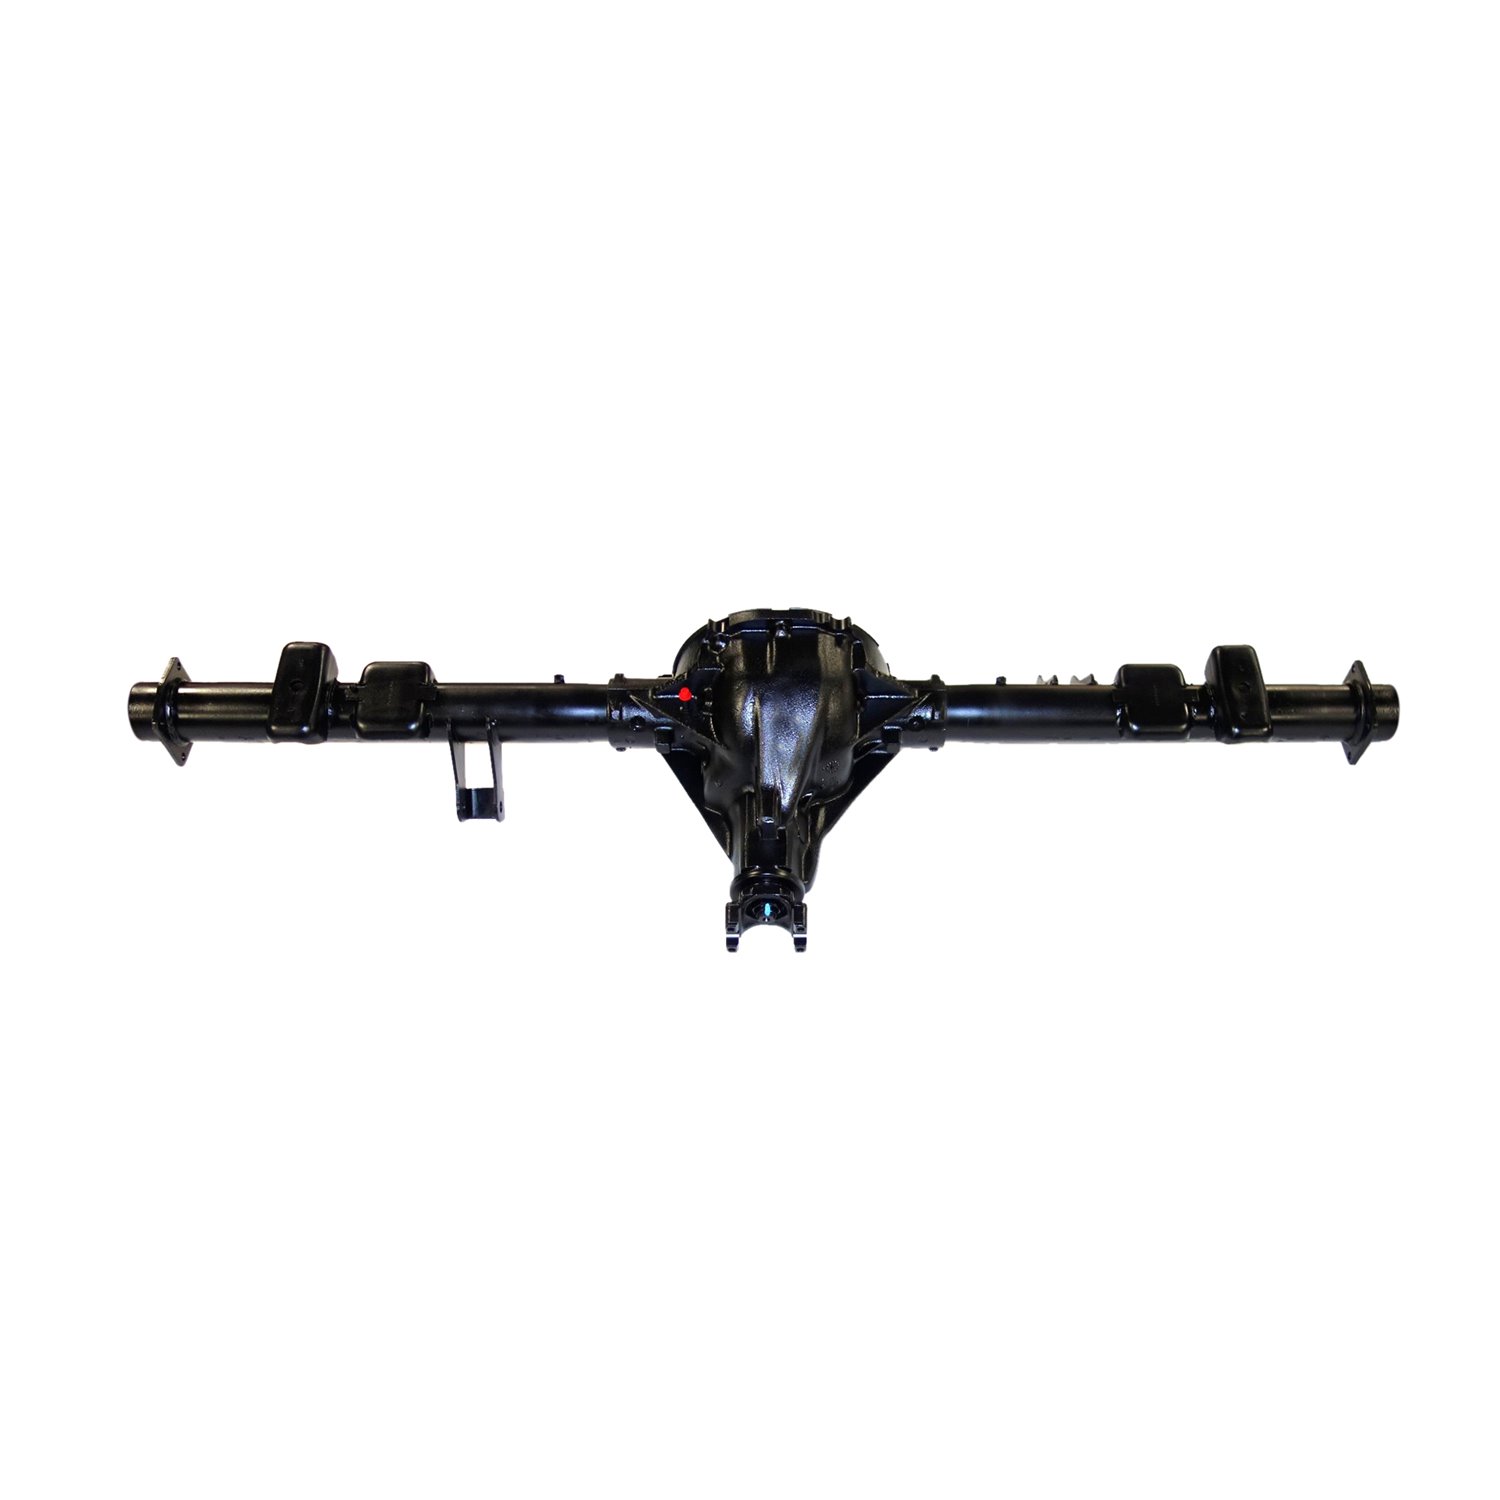 Remanufactured Complete Axle Assy for GM 9.5" 95-99 GM Suburban 1500 3.73 , 4x4, 8 Lug